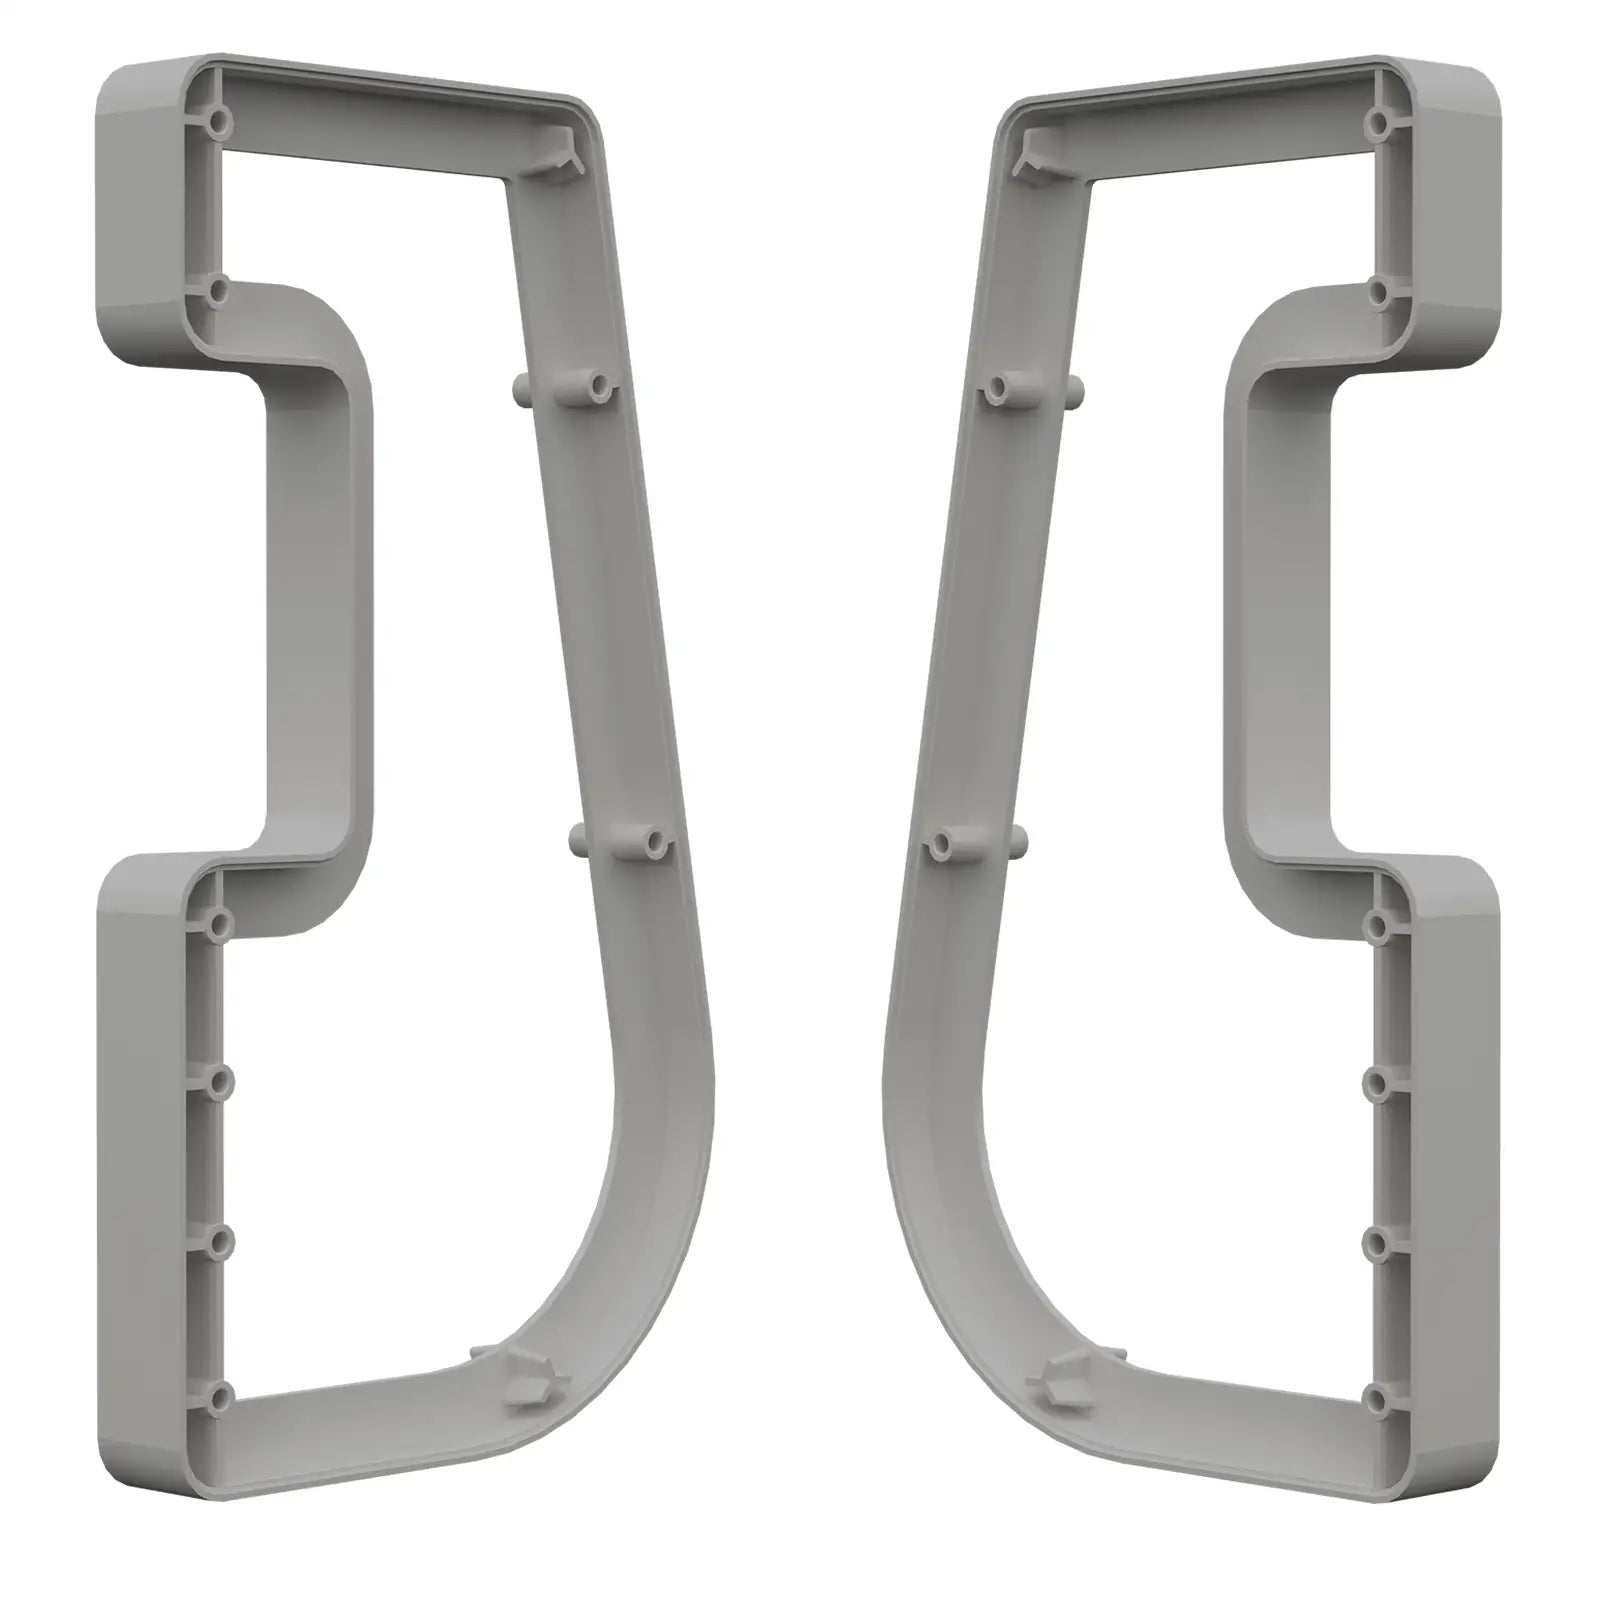 Spacer Bracket for Pull Down Rail - Grey - Decor And Decor